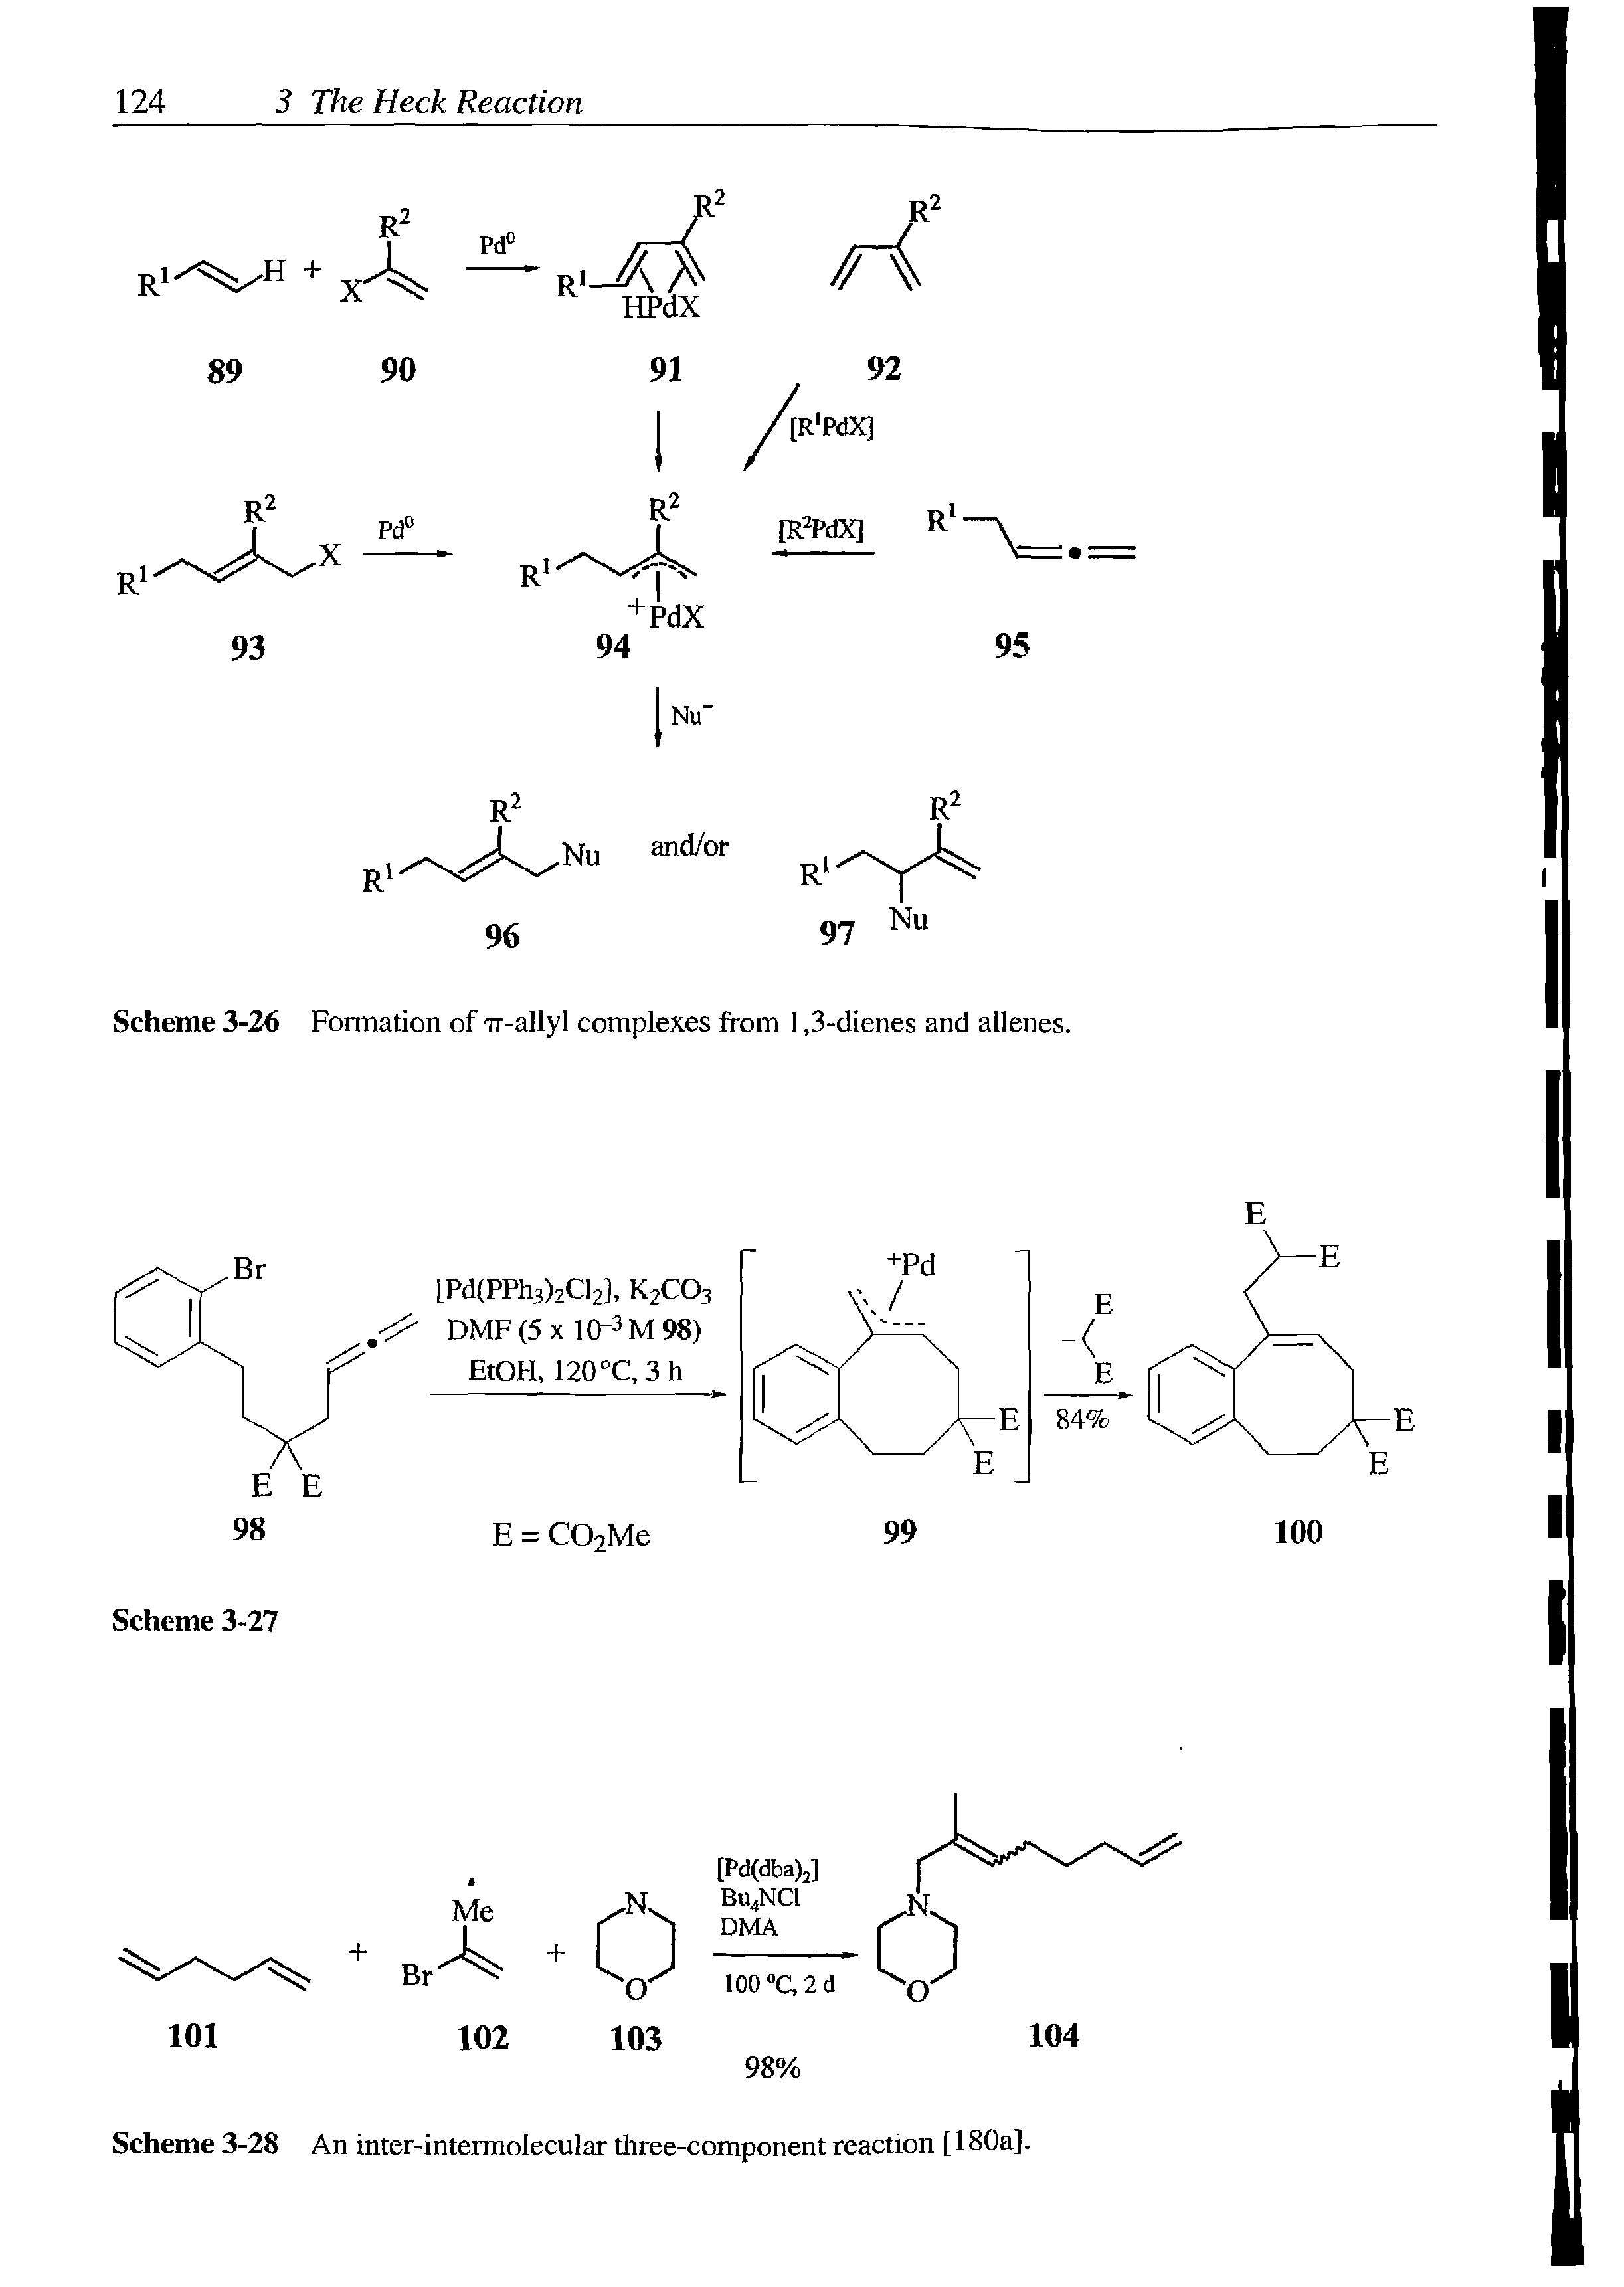 Scheme 3-26 Fonnation of Tr-allyl complexes from 1,3-dienes and allenes.